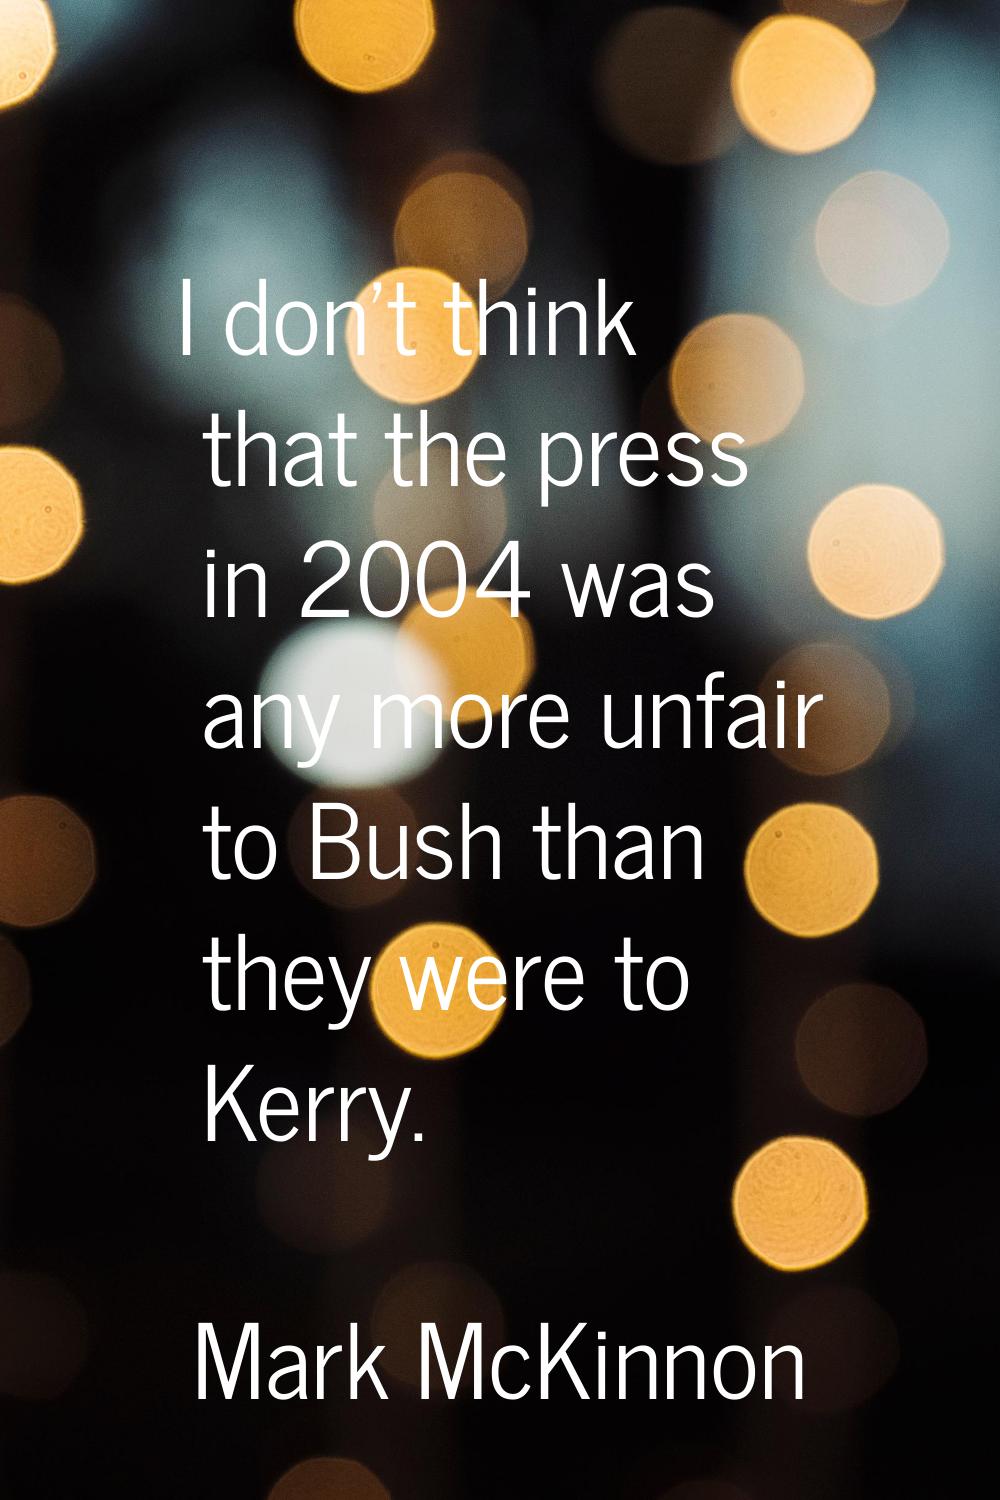 I don't think that the press in 2004 was any more unfair to Bush than they were to Kerry.